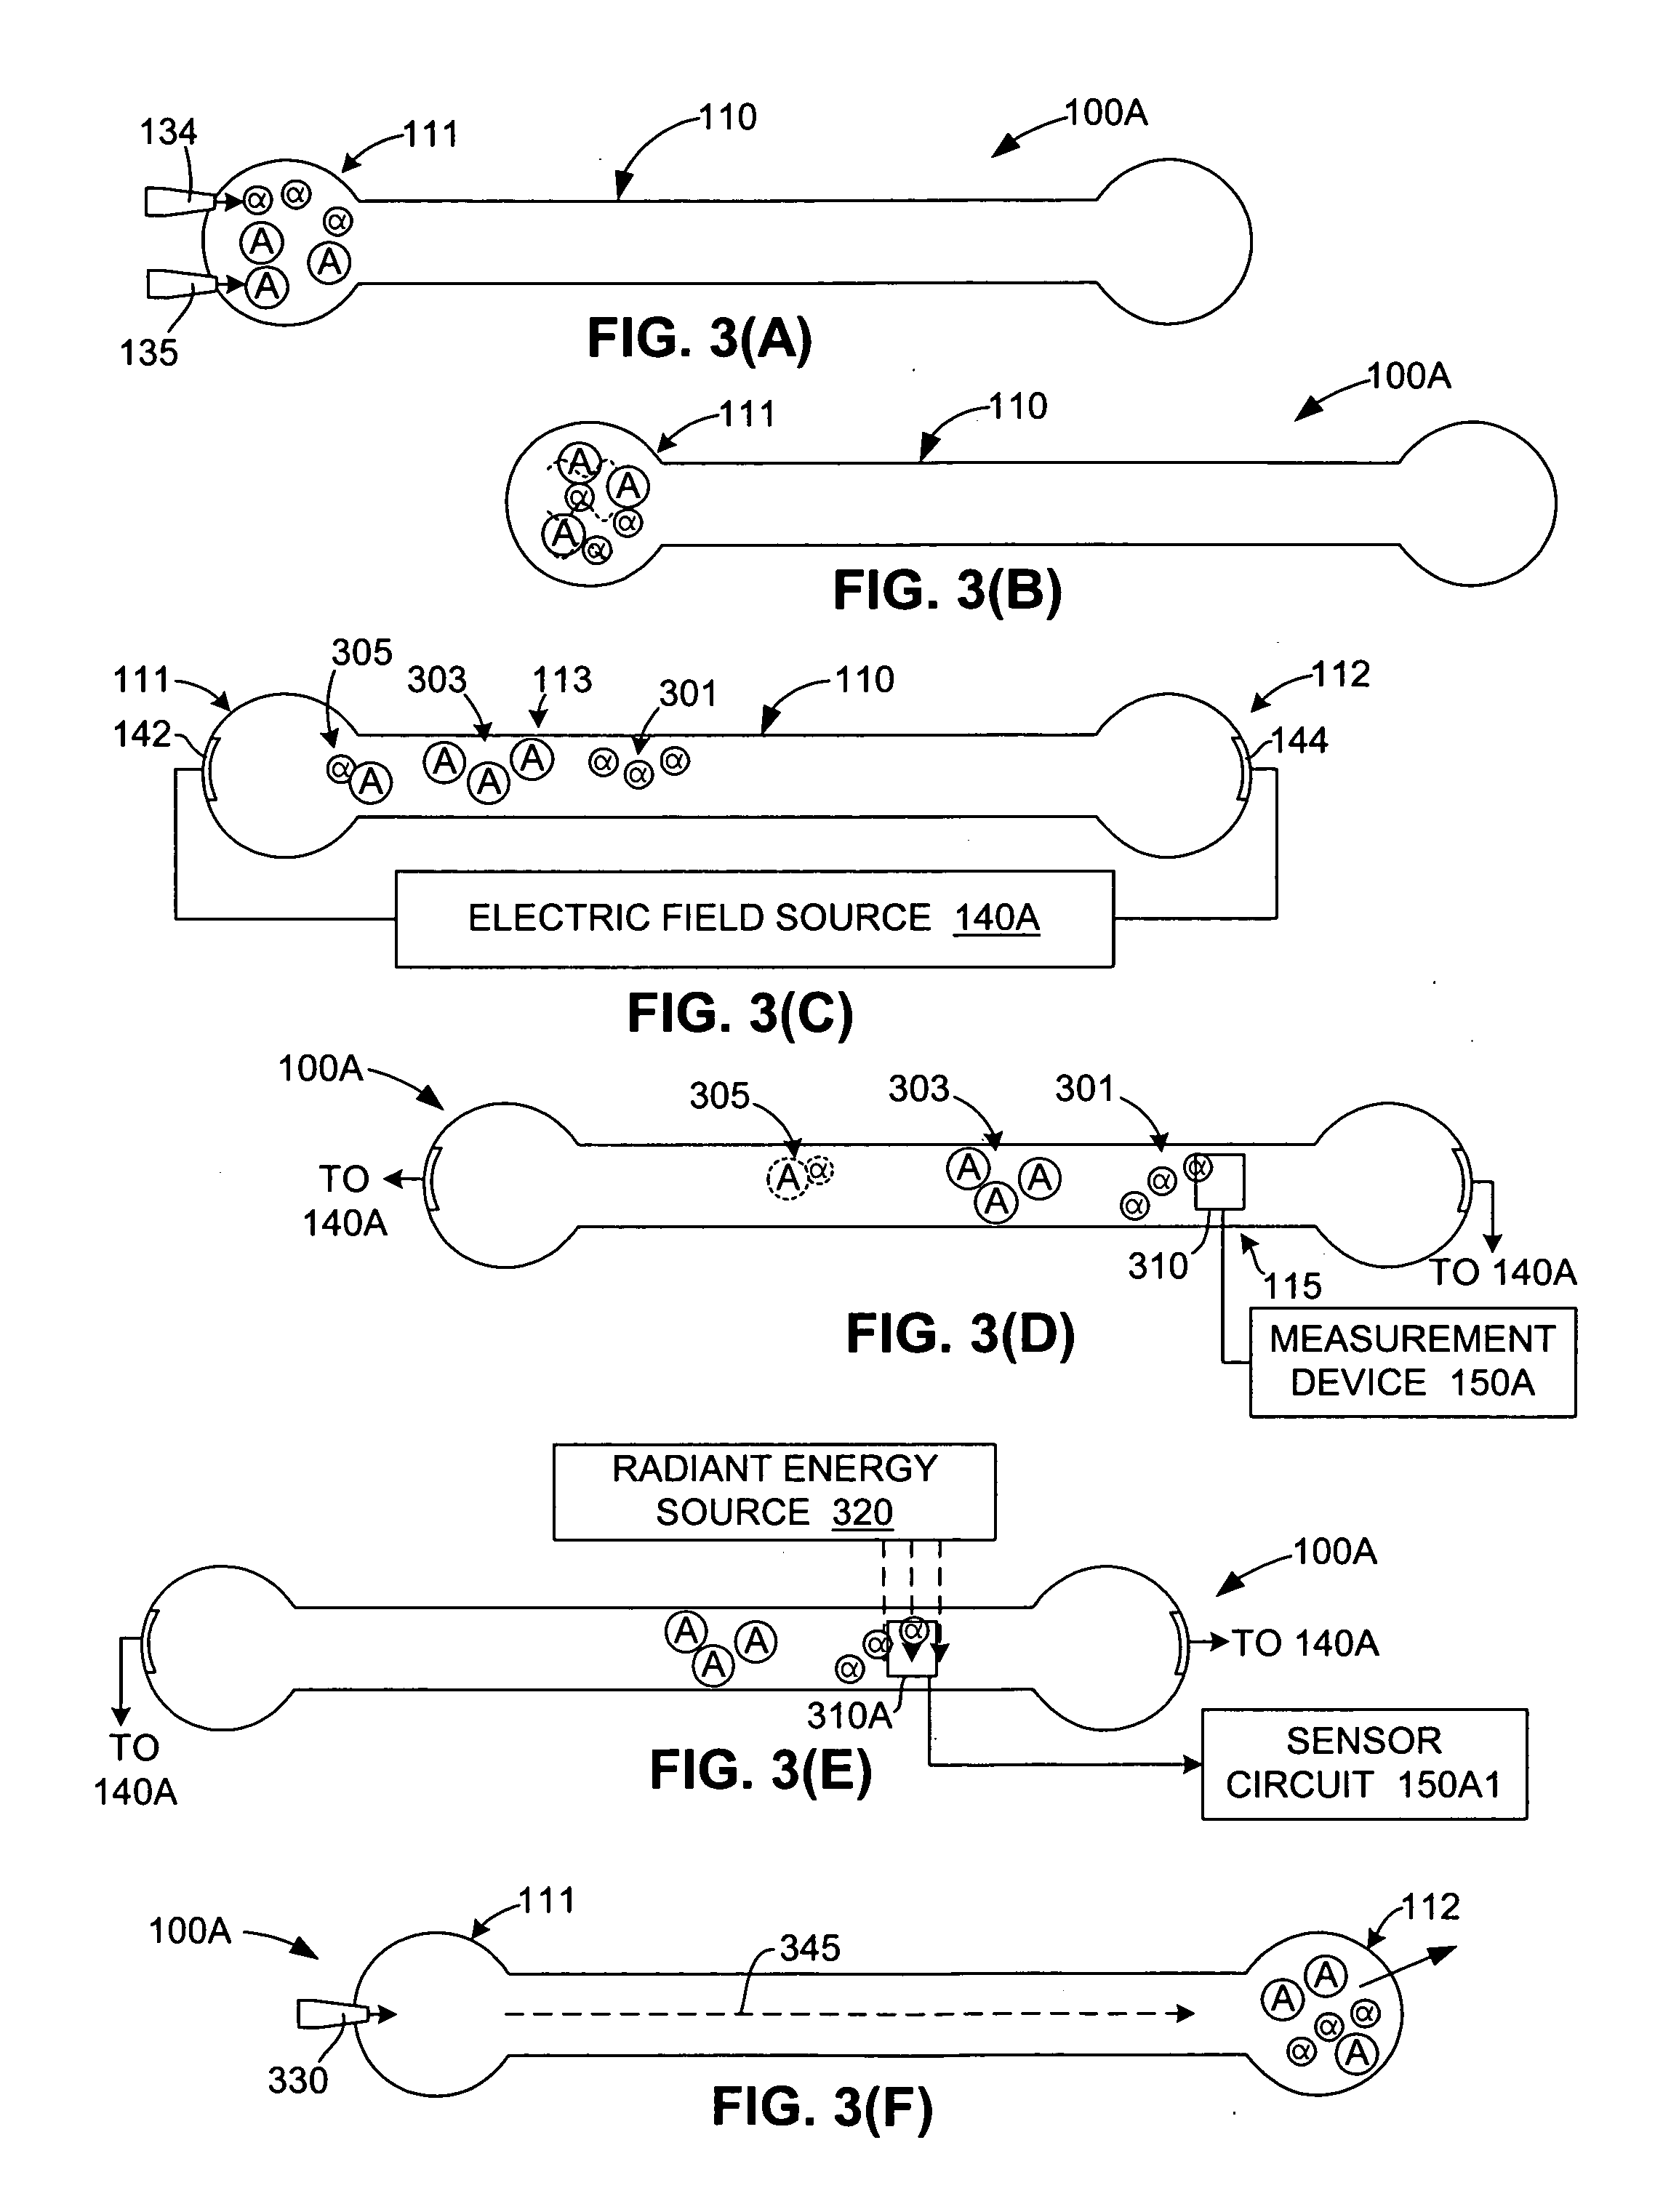 Molecular binding event detection using separation channels